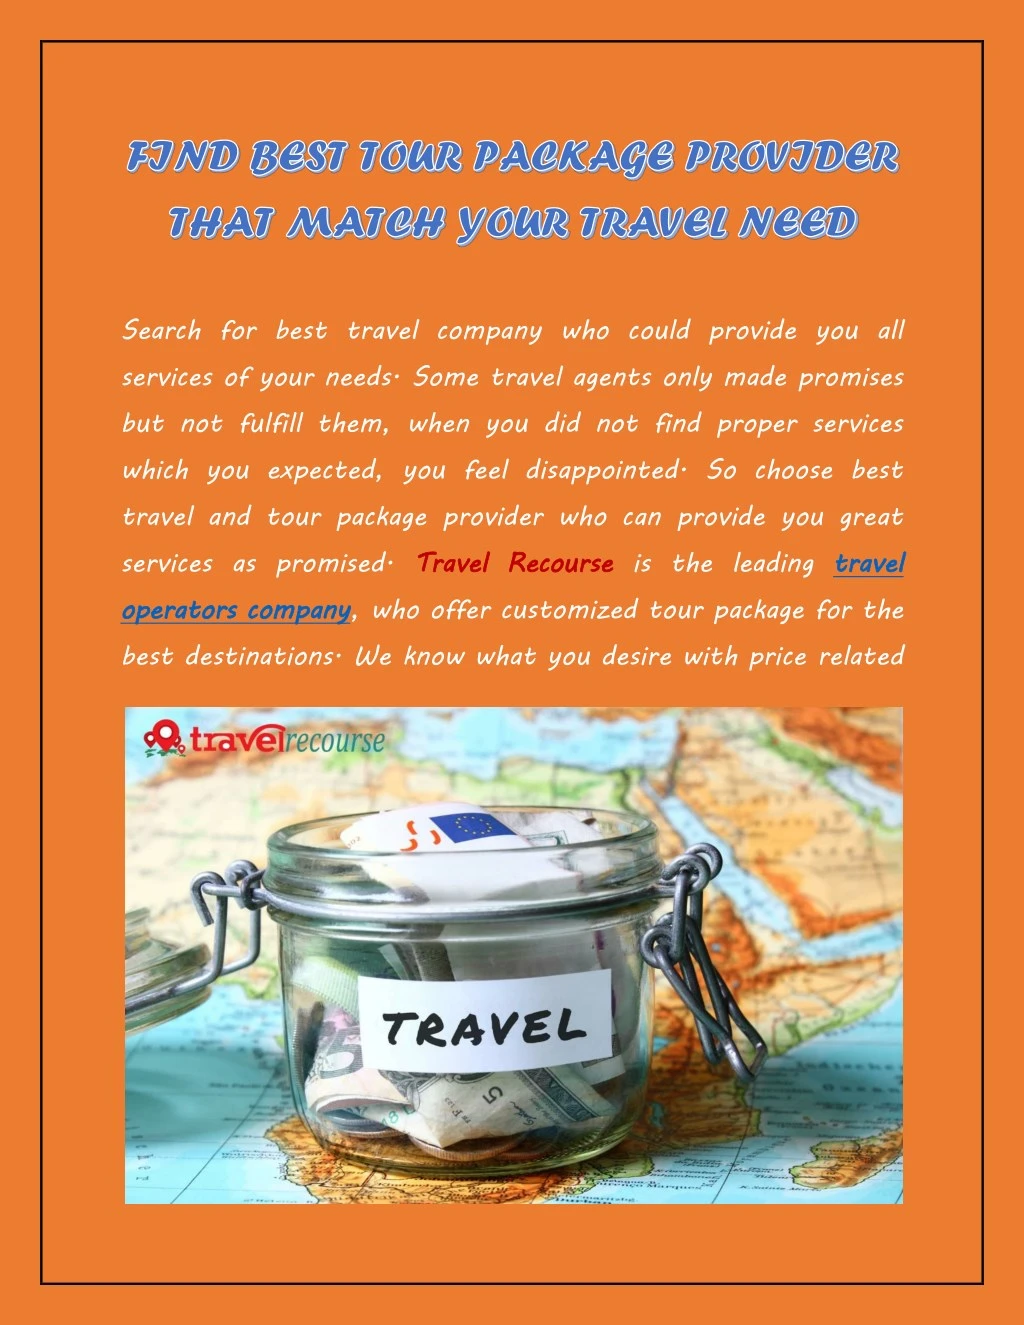 search for best travel company who could provide